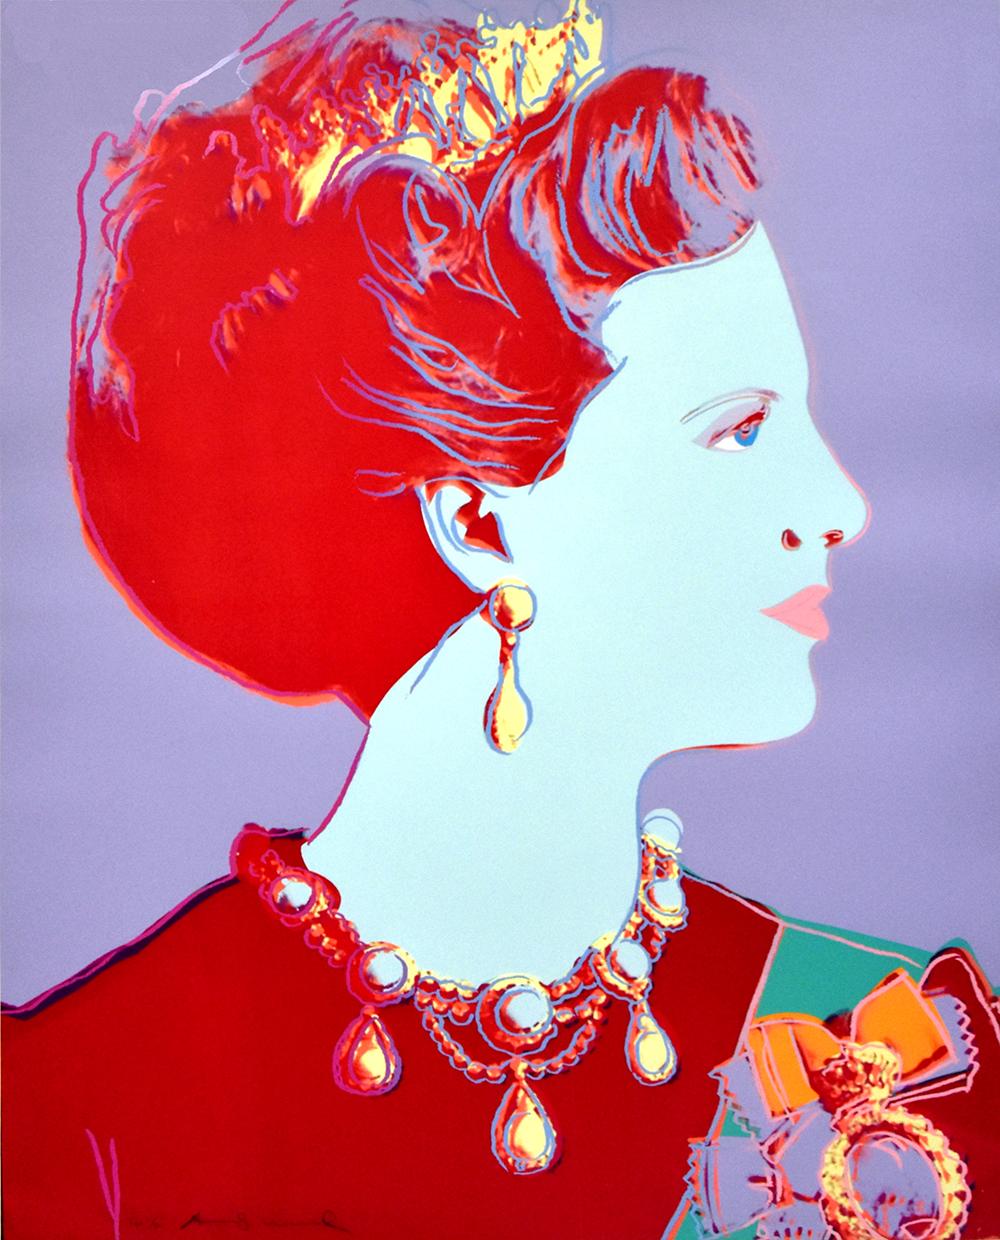 Andy Warhol Portrait Print - Queen Margrethe II (from Reigning Queens Series), Unique Trial Proof, 1985 